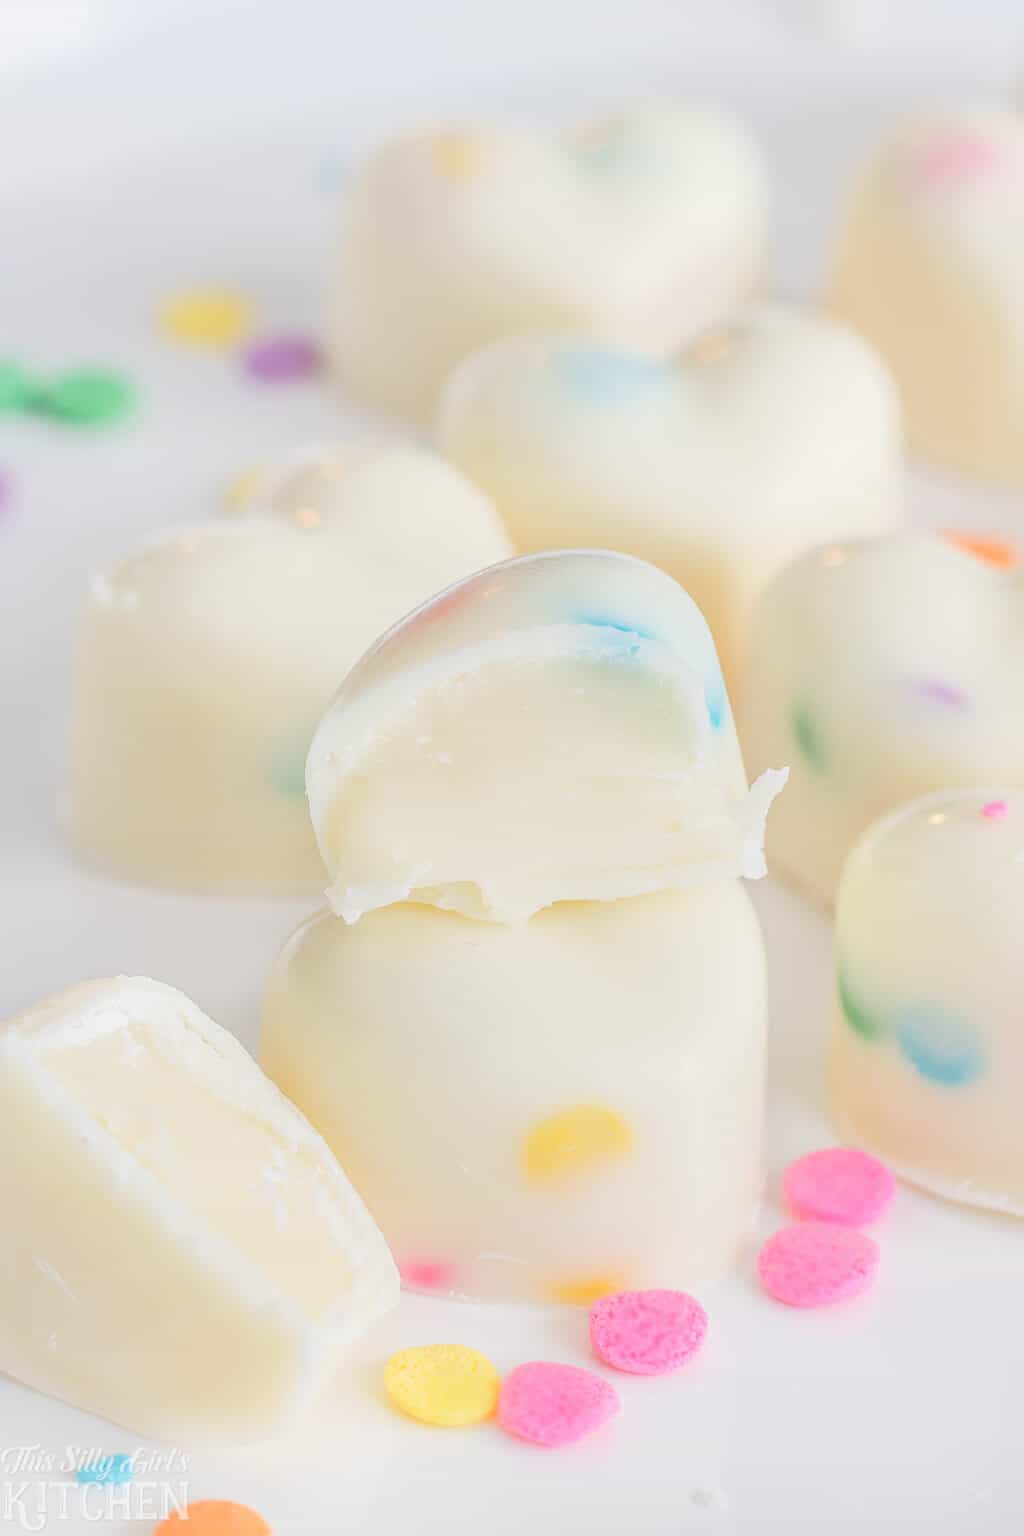 White Chocolate truffles, made with white chocolate #ganache, these are an easy, fun candy you can make at home! #Recipe from ThisSillyGirlsKitchen.com #whitechocolate #truffles #valentinesday #candy